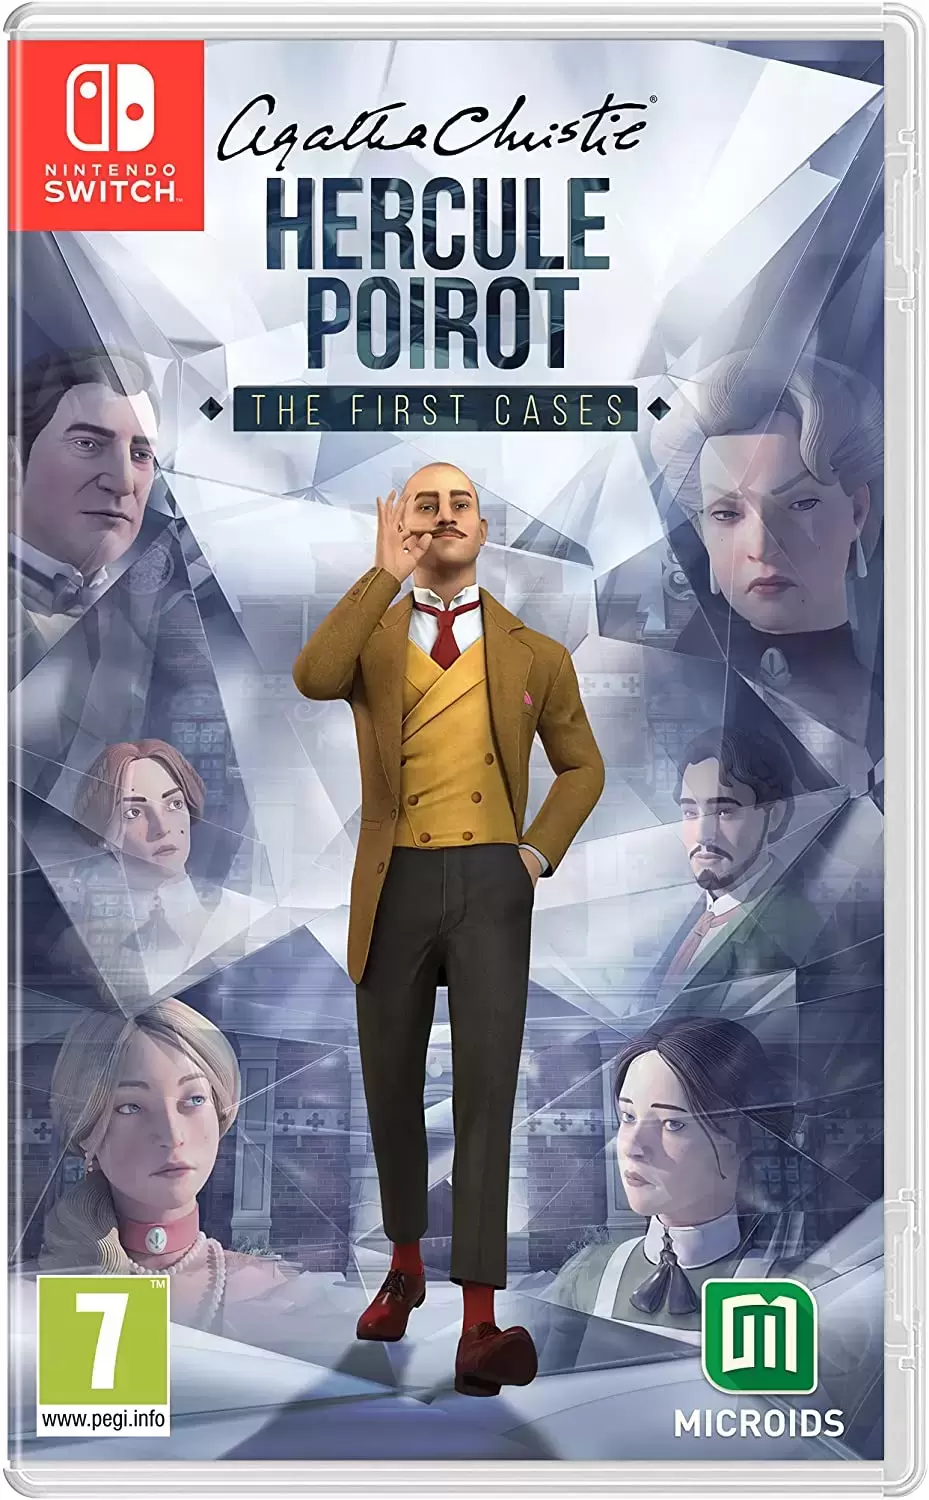 Nintendo Switch Games - Agatha Christie - Hercule Poirot: The First Cases